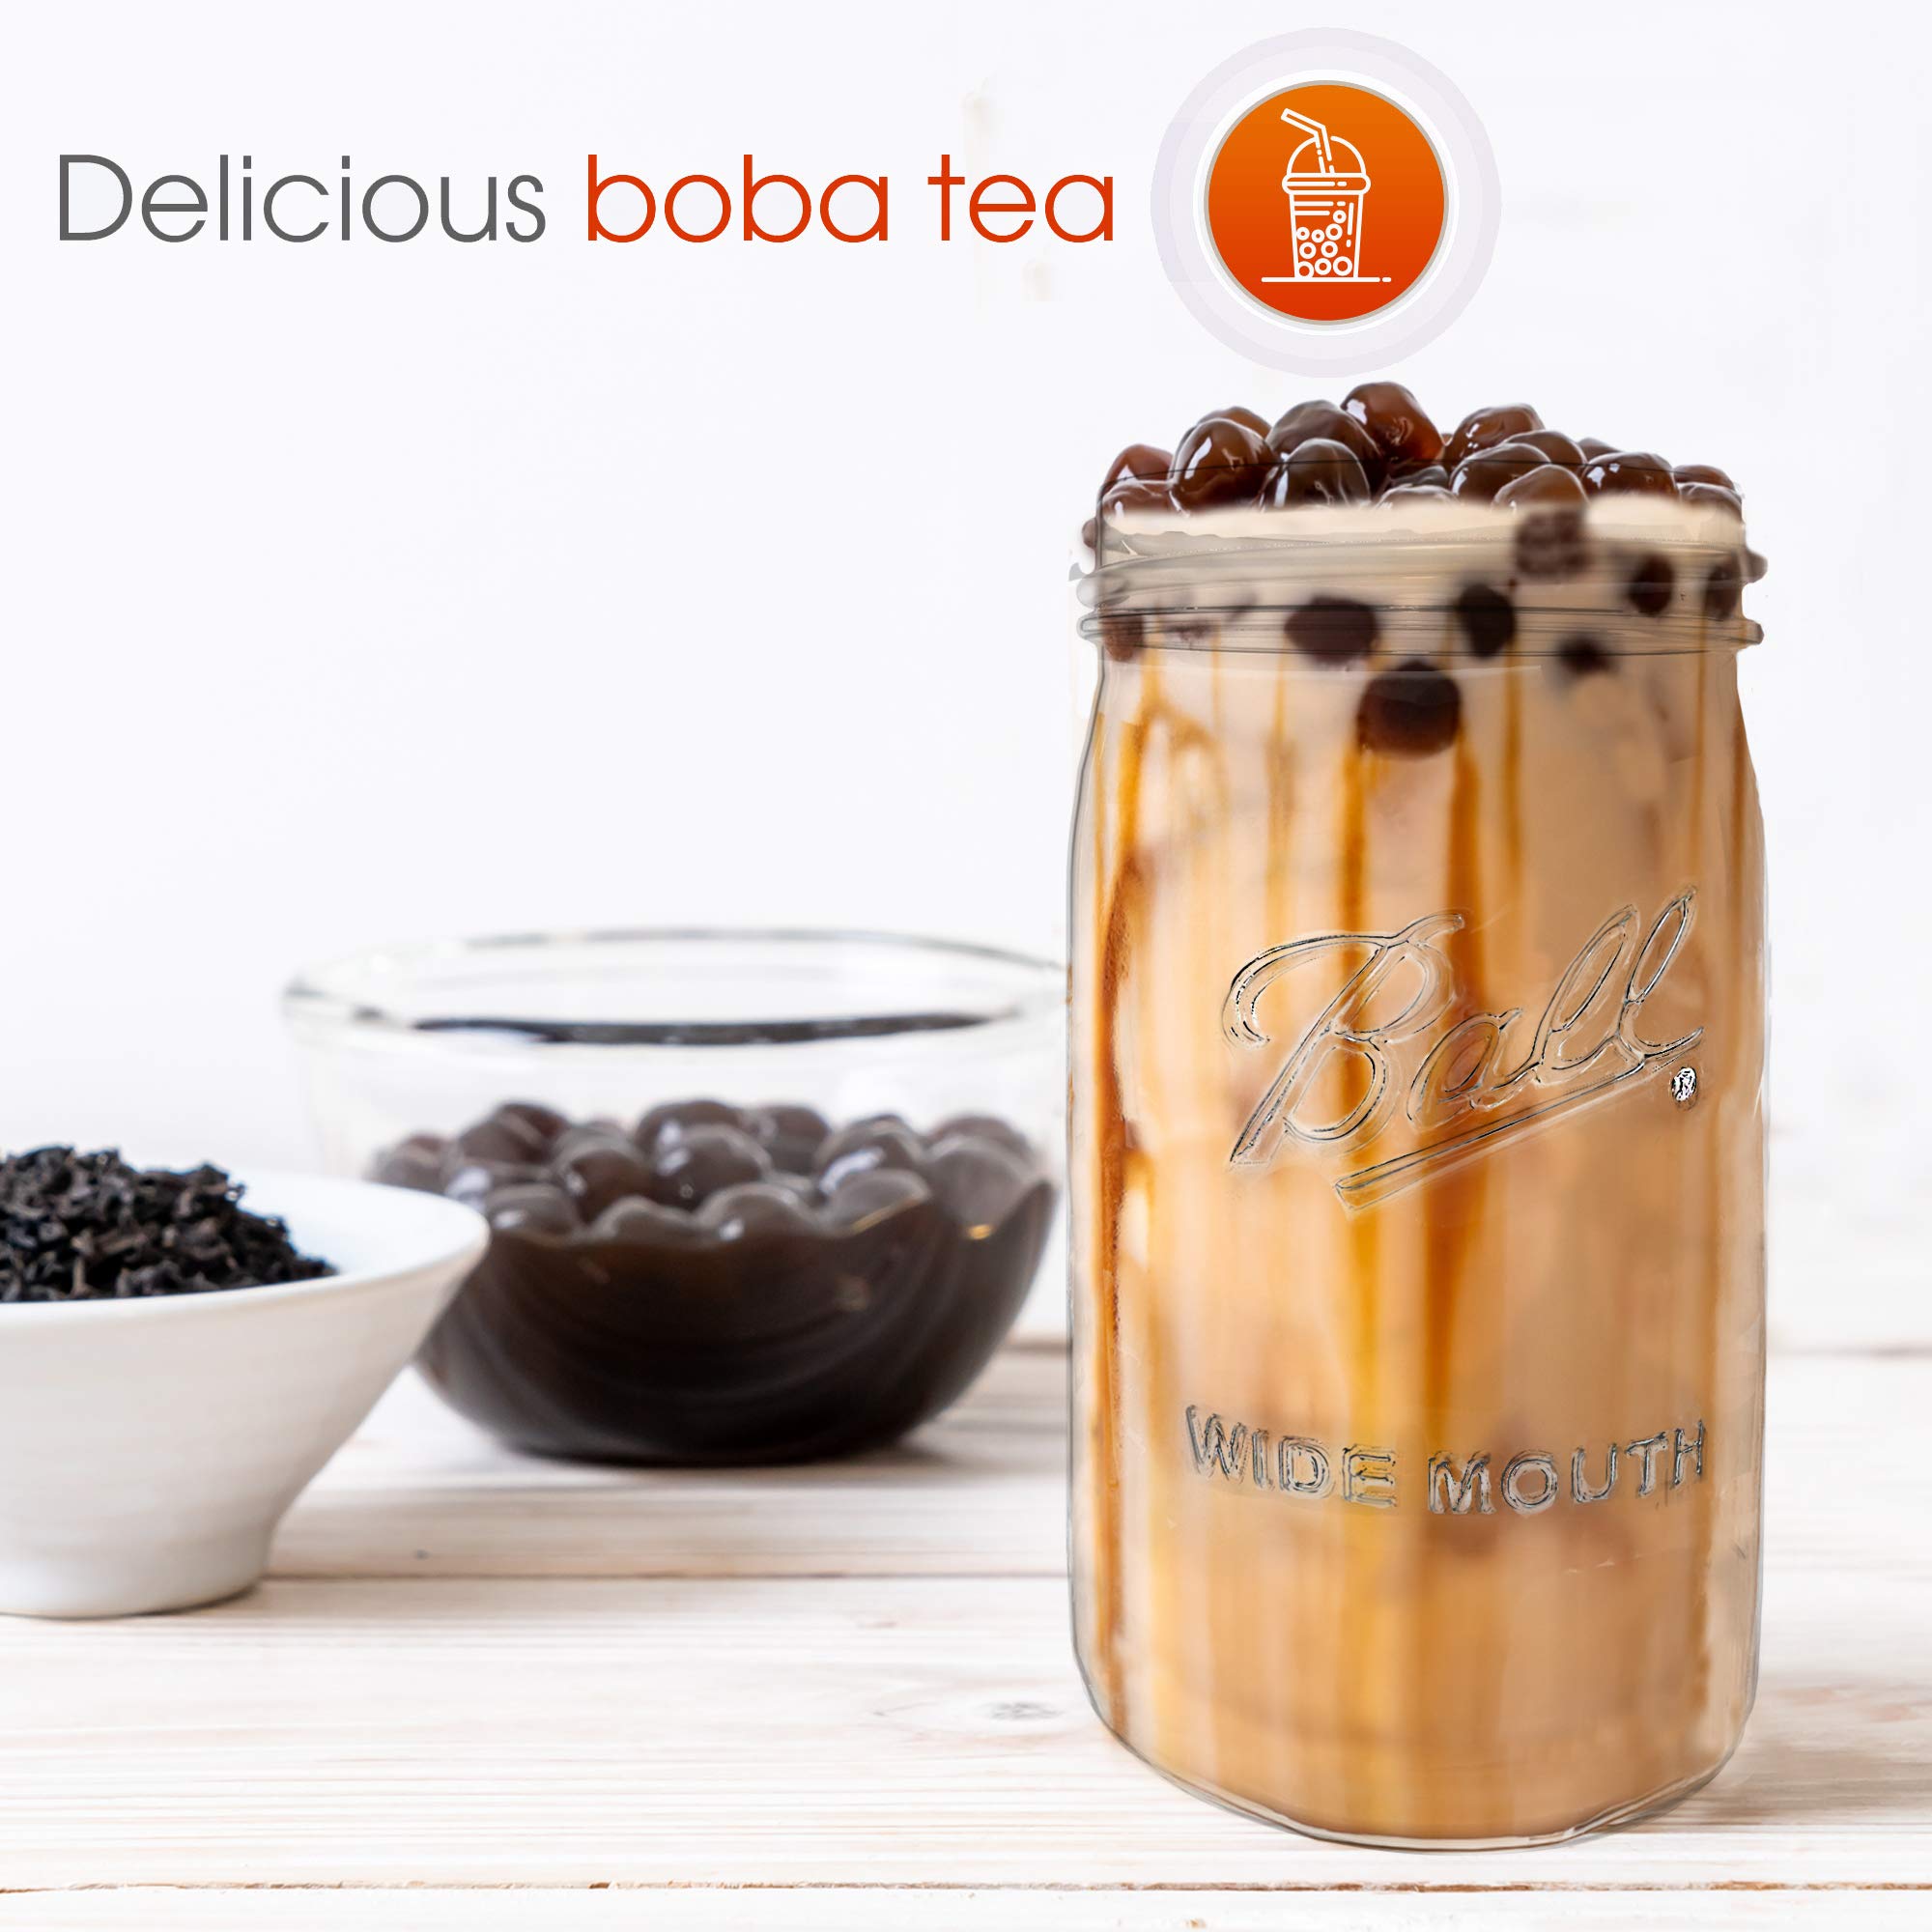 Reusable Boba Bubble Tea & Smoothie Cups - 2 Glass Wide Mouth 32 oz Mason Jars with Bamboo Lids - 2 Reusable Silver Stainless Steel Boba Straws